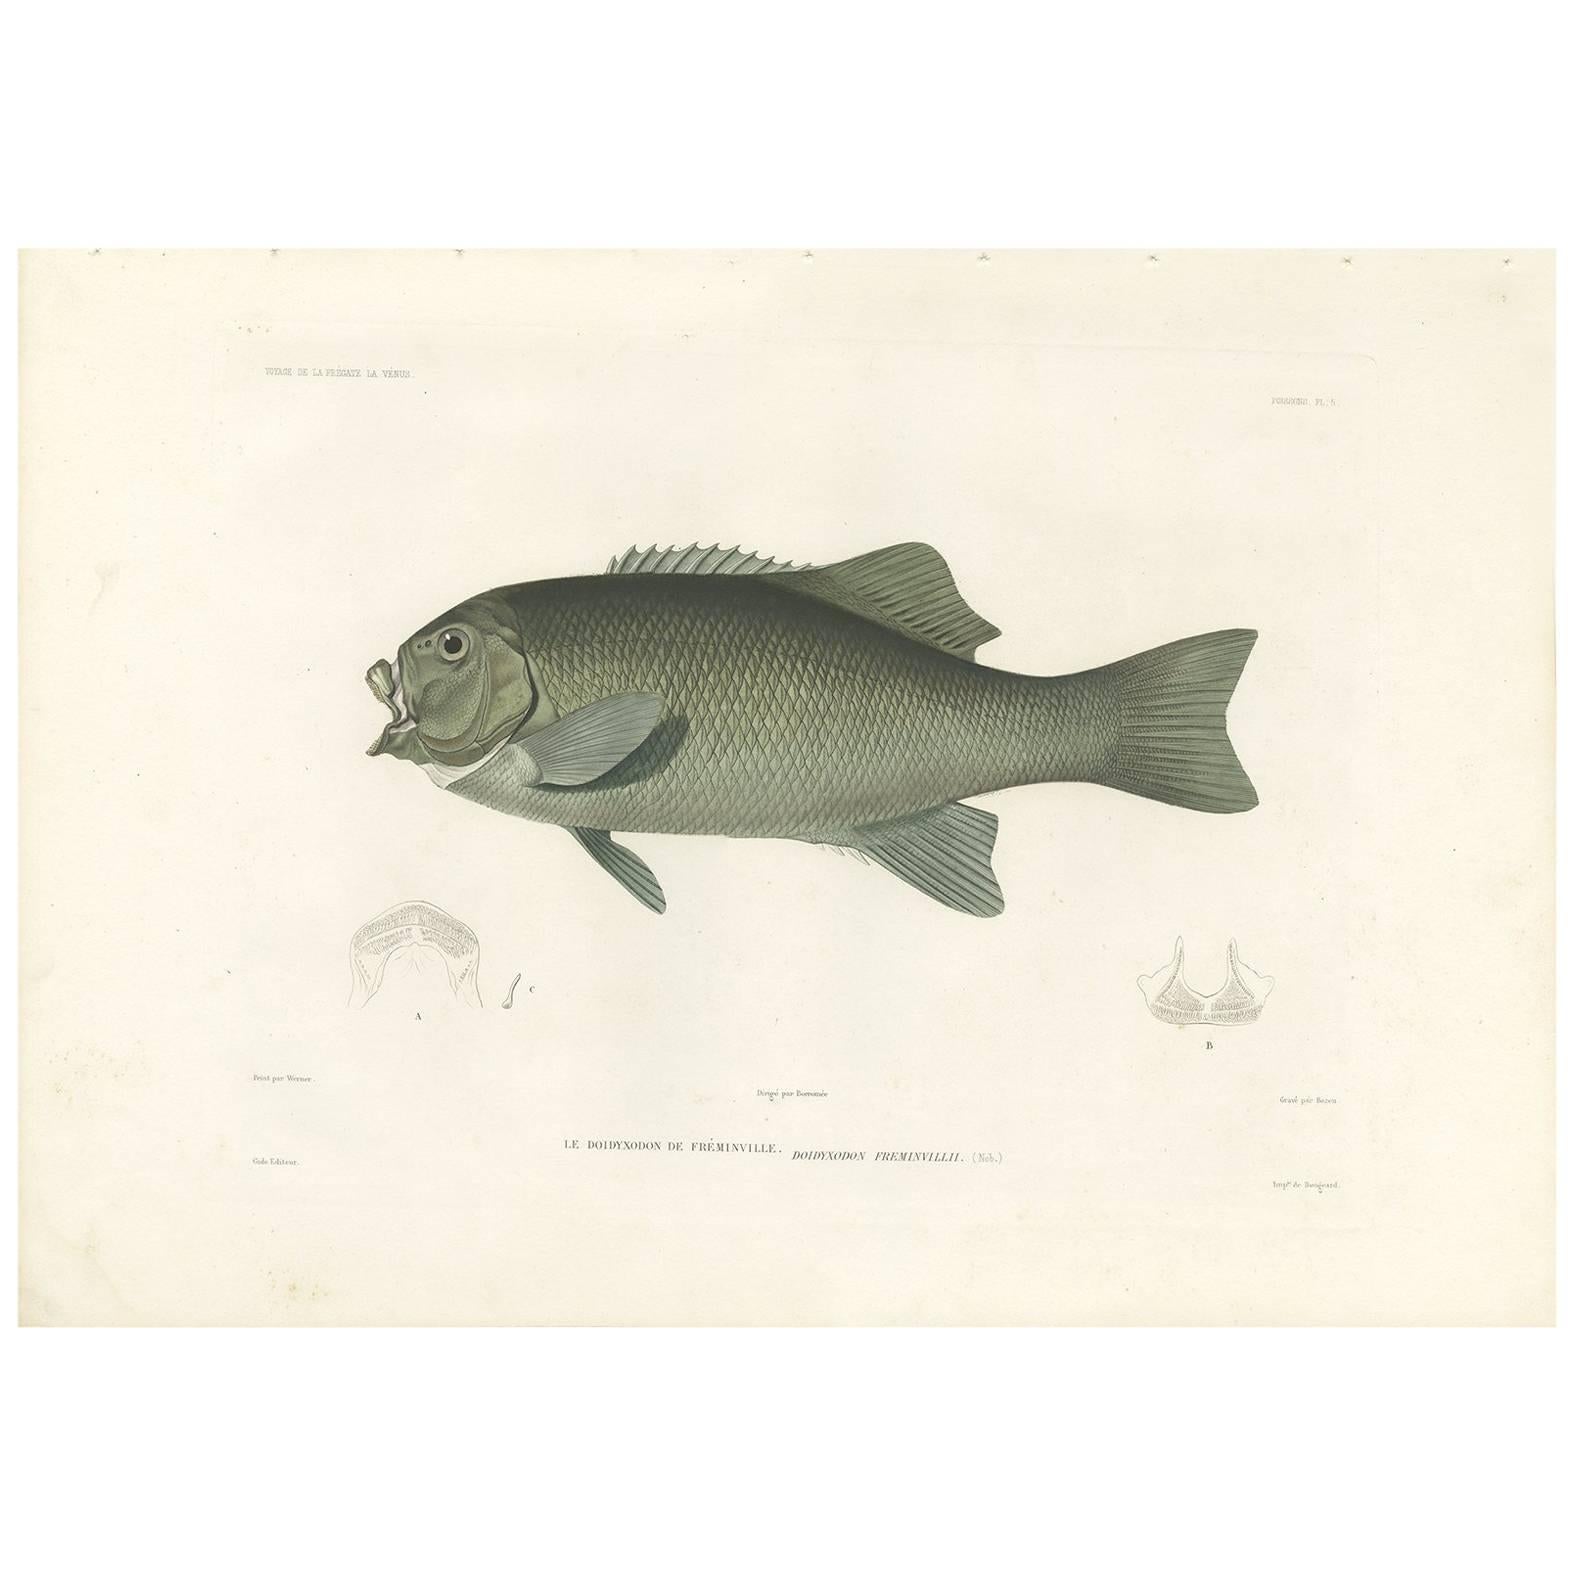 Antique Fish Print of the Doidyxodon Freminvillii by Gide, 1846 For Sale